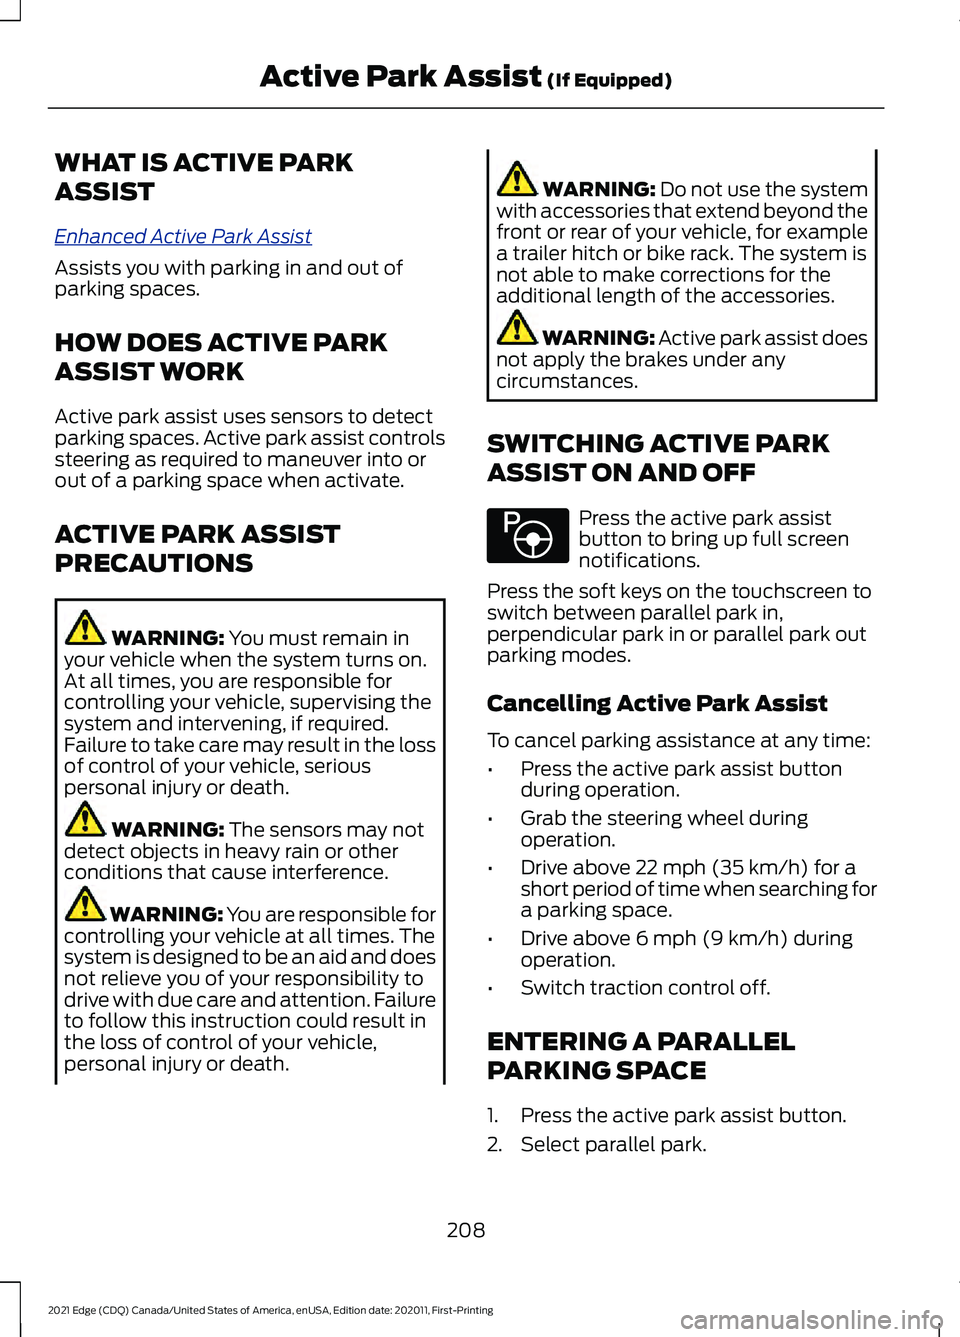 FORD EDGE 2021  Owners Manual WHAT IS ACTIVE PARK
ASSIST
Enhanc
e d A c tiv e P ark A ssis t
Assists you with parking in and out of
parking spaces.
HOW DOES ACTIVE PARK
ASSIST WORK
Active park assist uses sensors to detect
parking